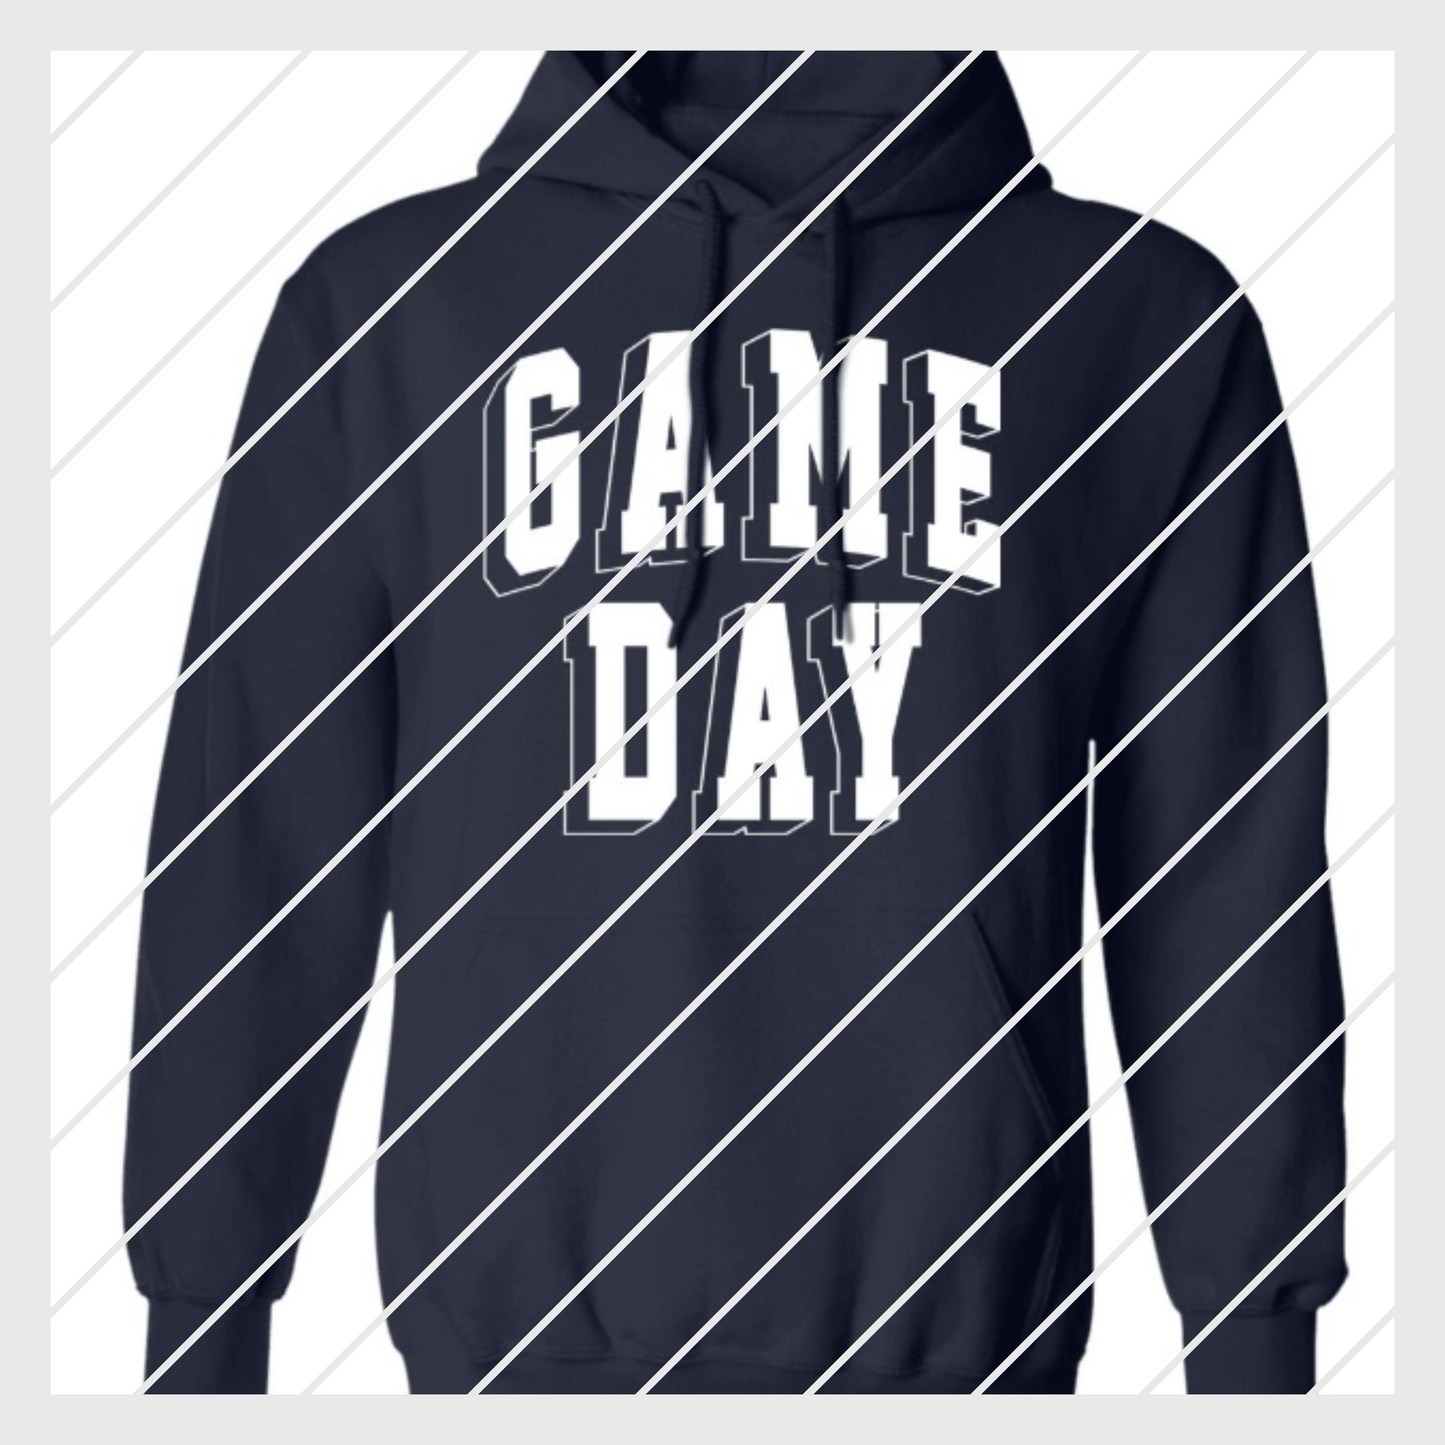 Game Day Hoodie- Adult Utility